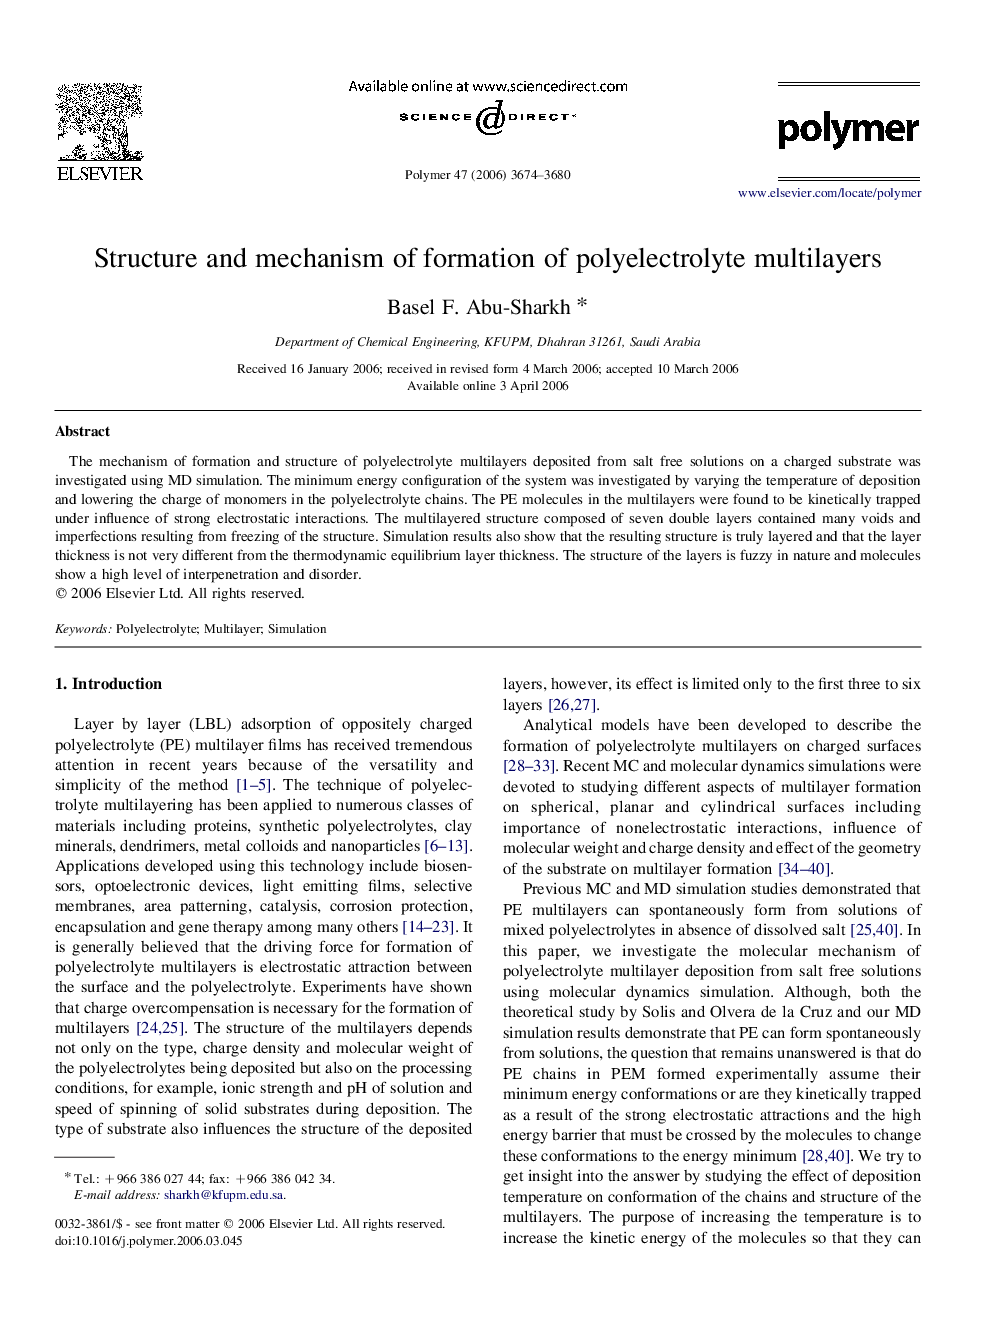 Structure and mechanism of formation of polyelectrolyte multilayers